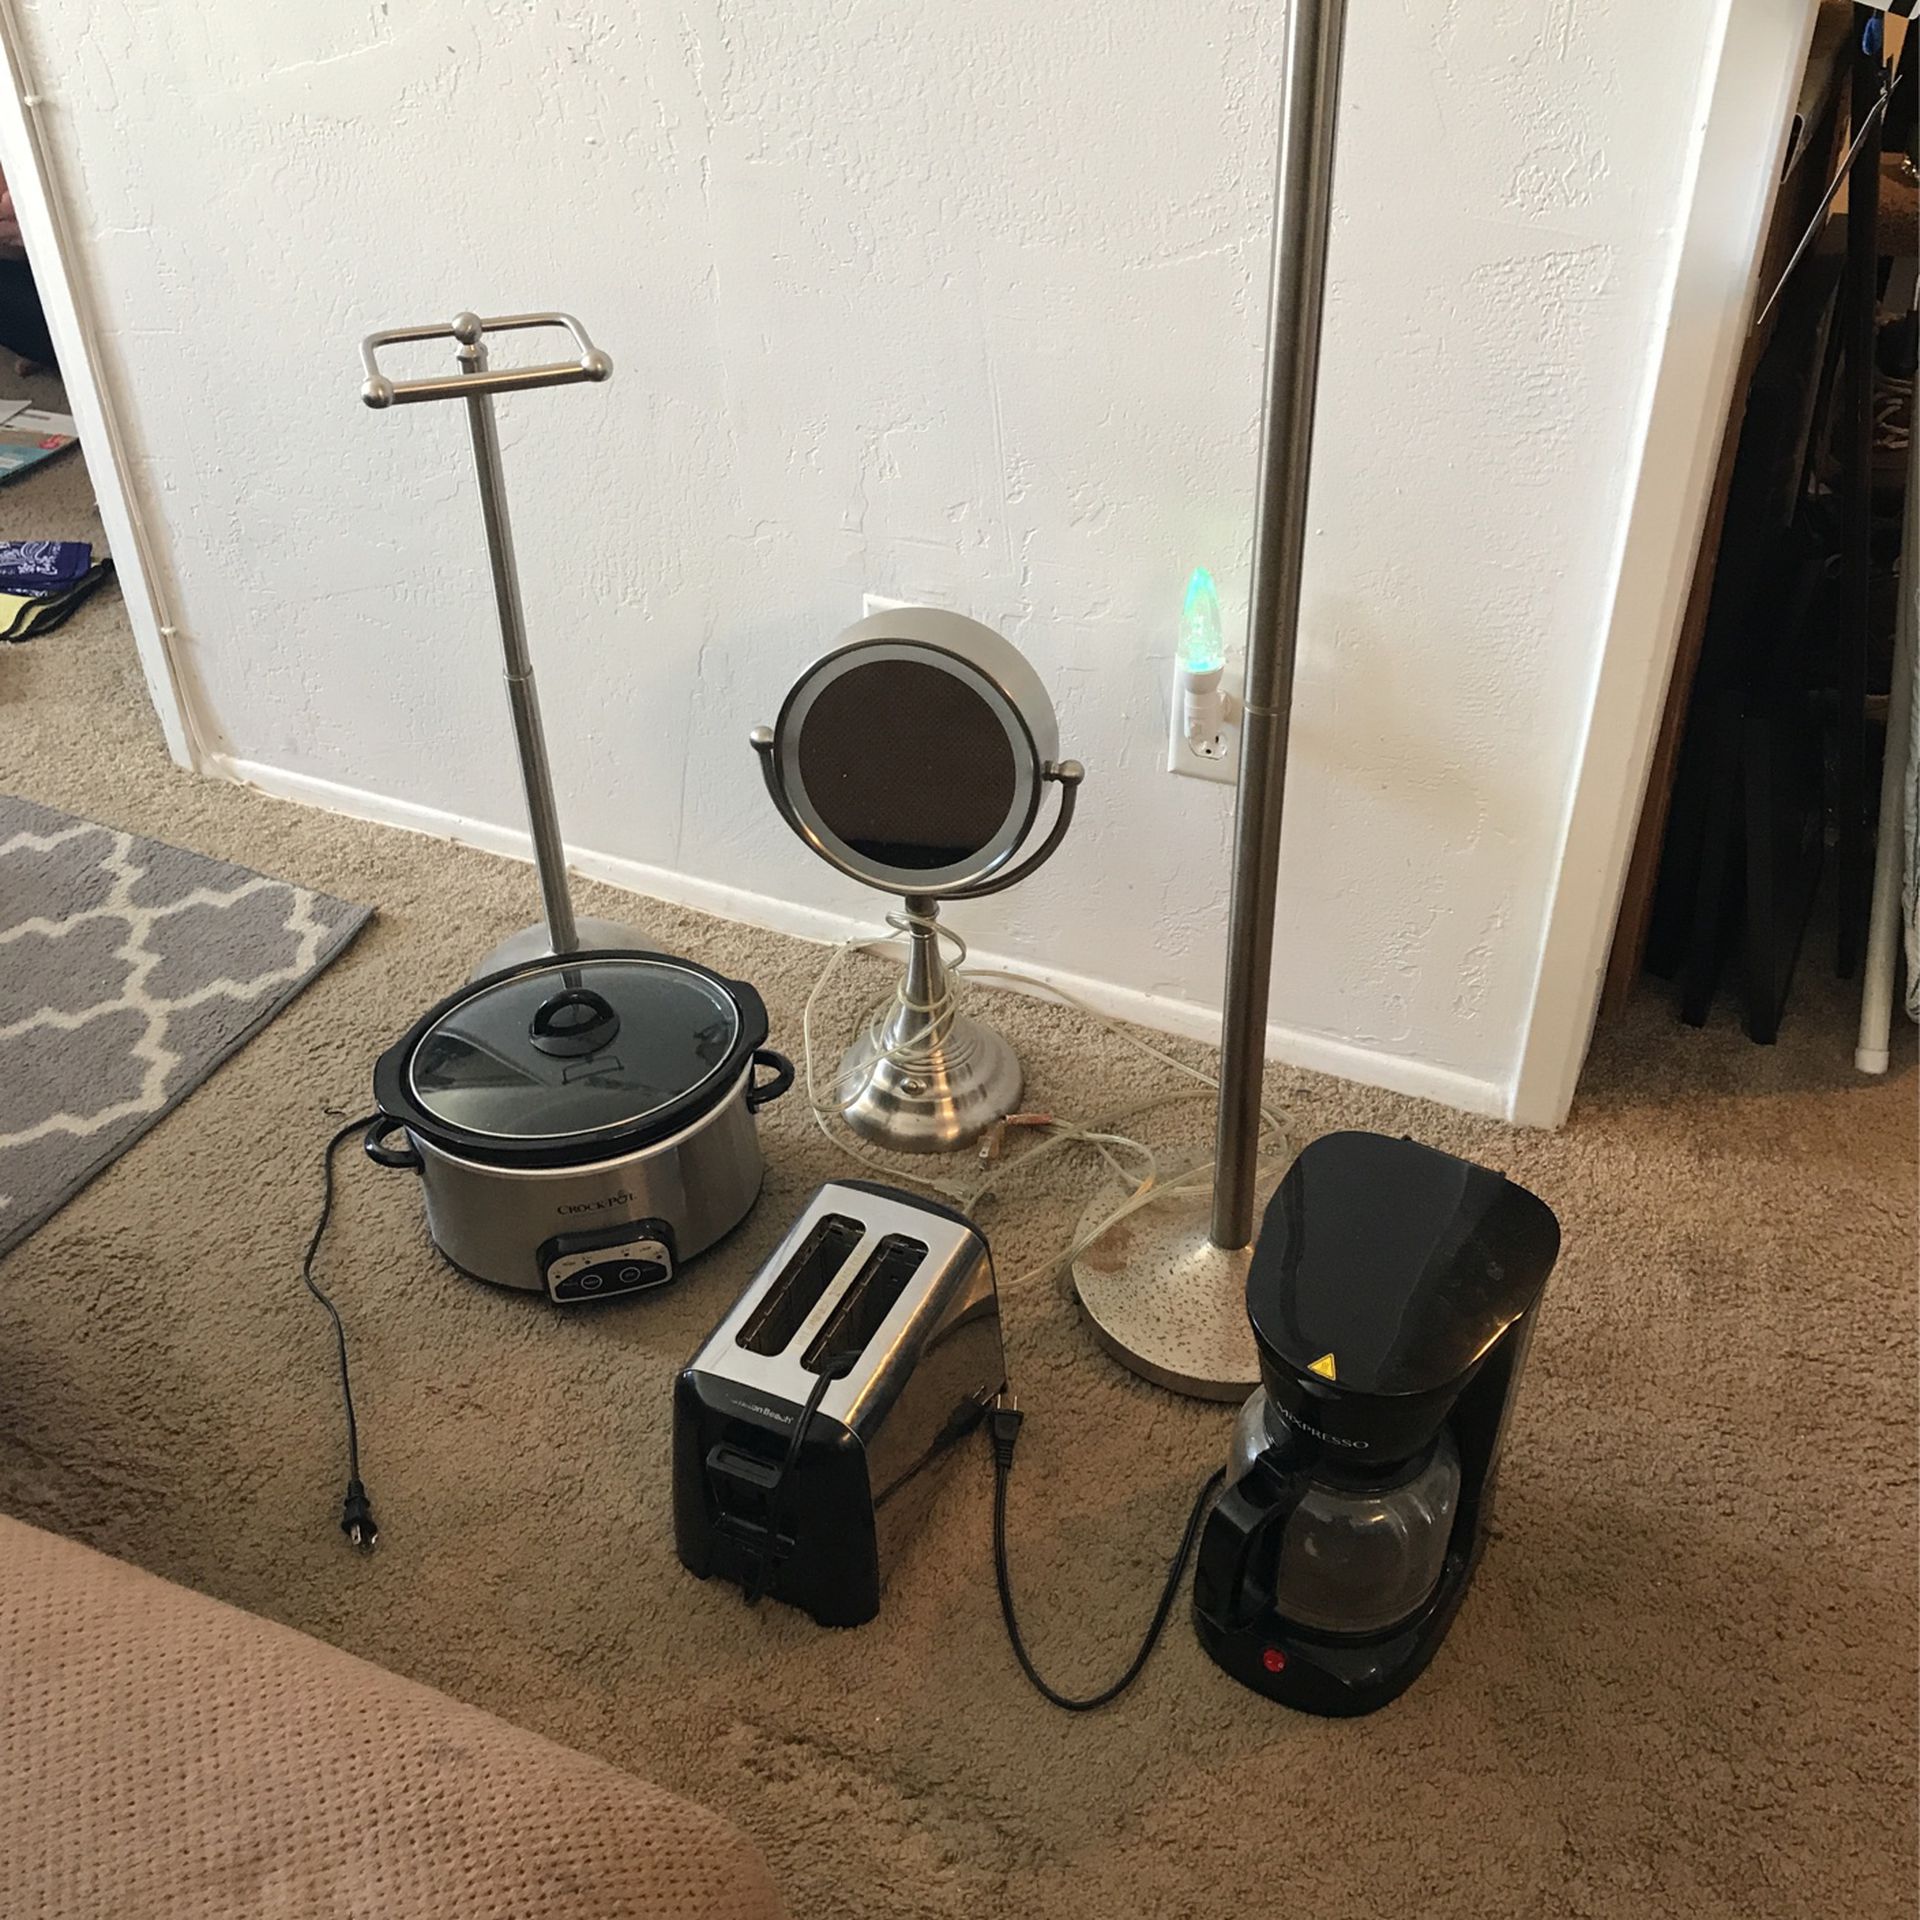 Bathroom And Kitchen Stuff Bundle Stainless Steal Toilet Paper Holder, Standup Lamp, Mirror, Crock-pot, Toaster, Coffee Maker,Hamilton Beach,Mixpresso